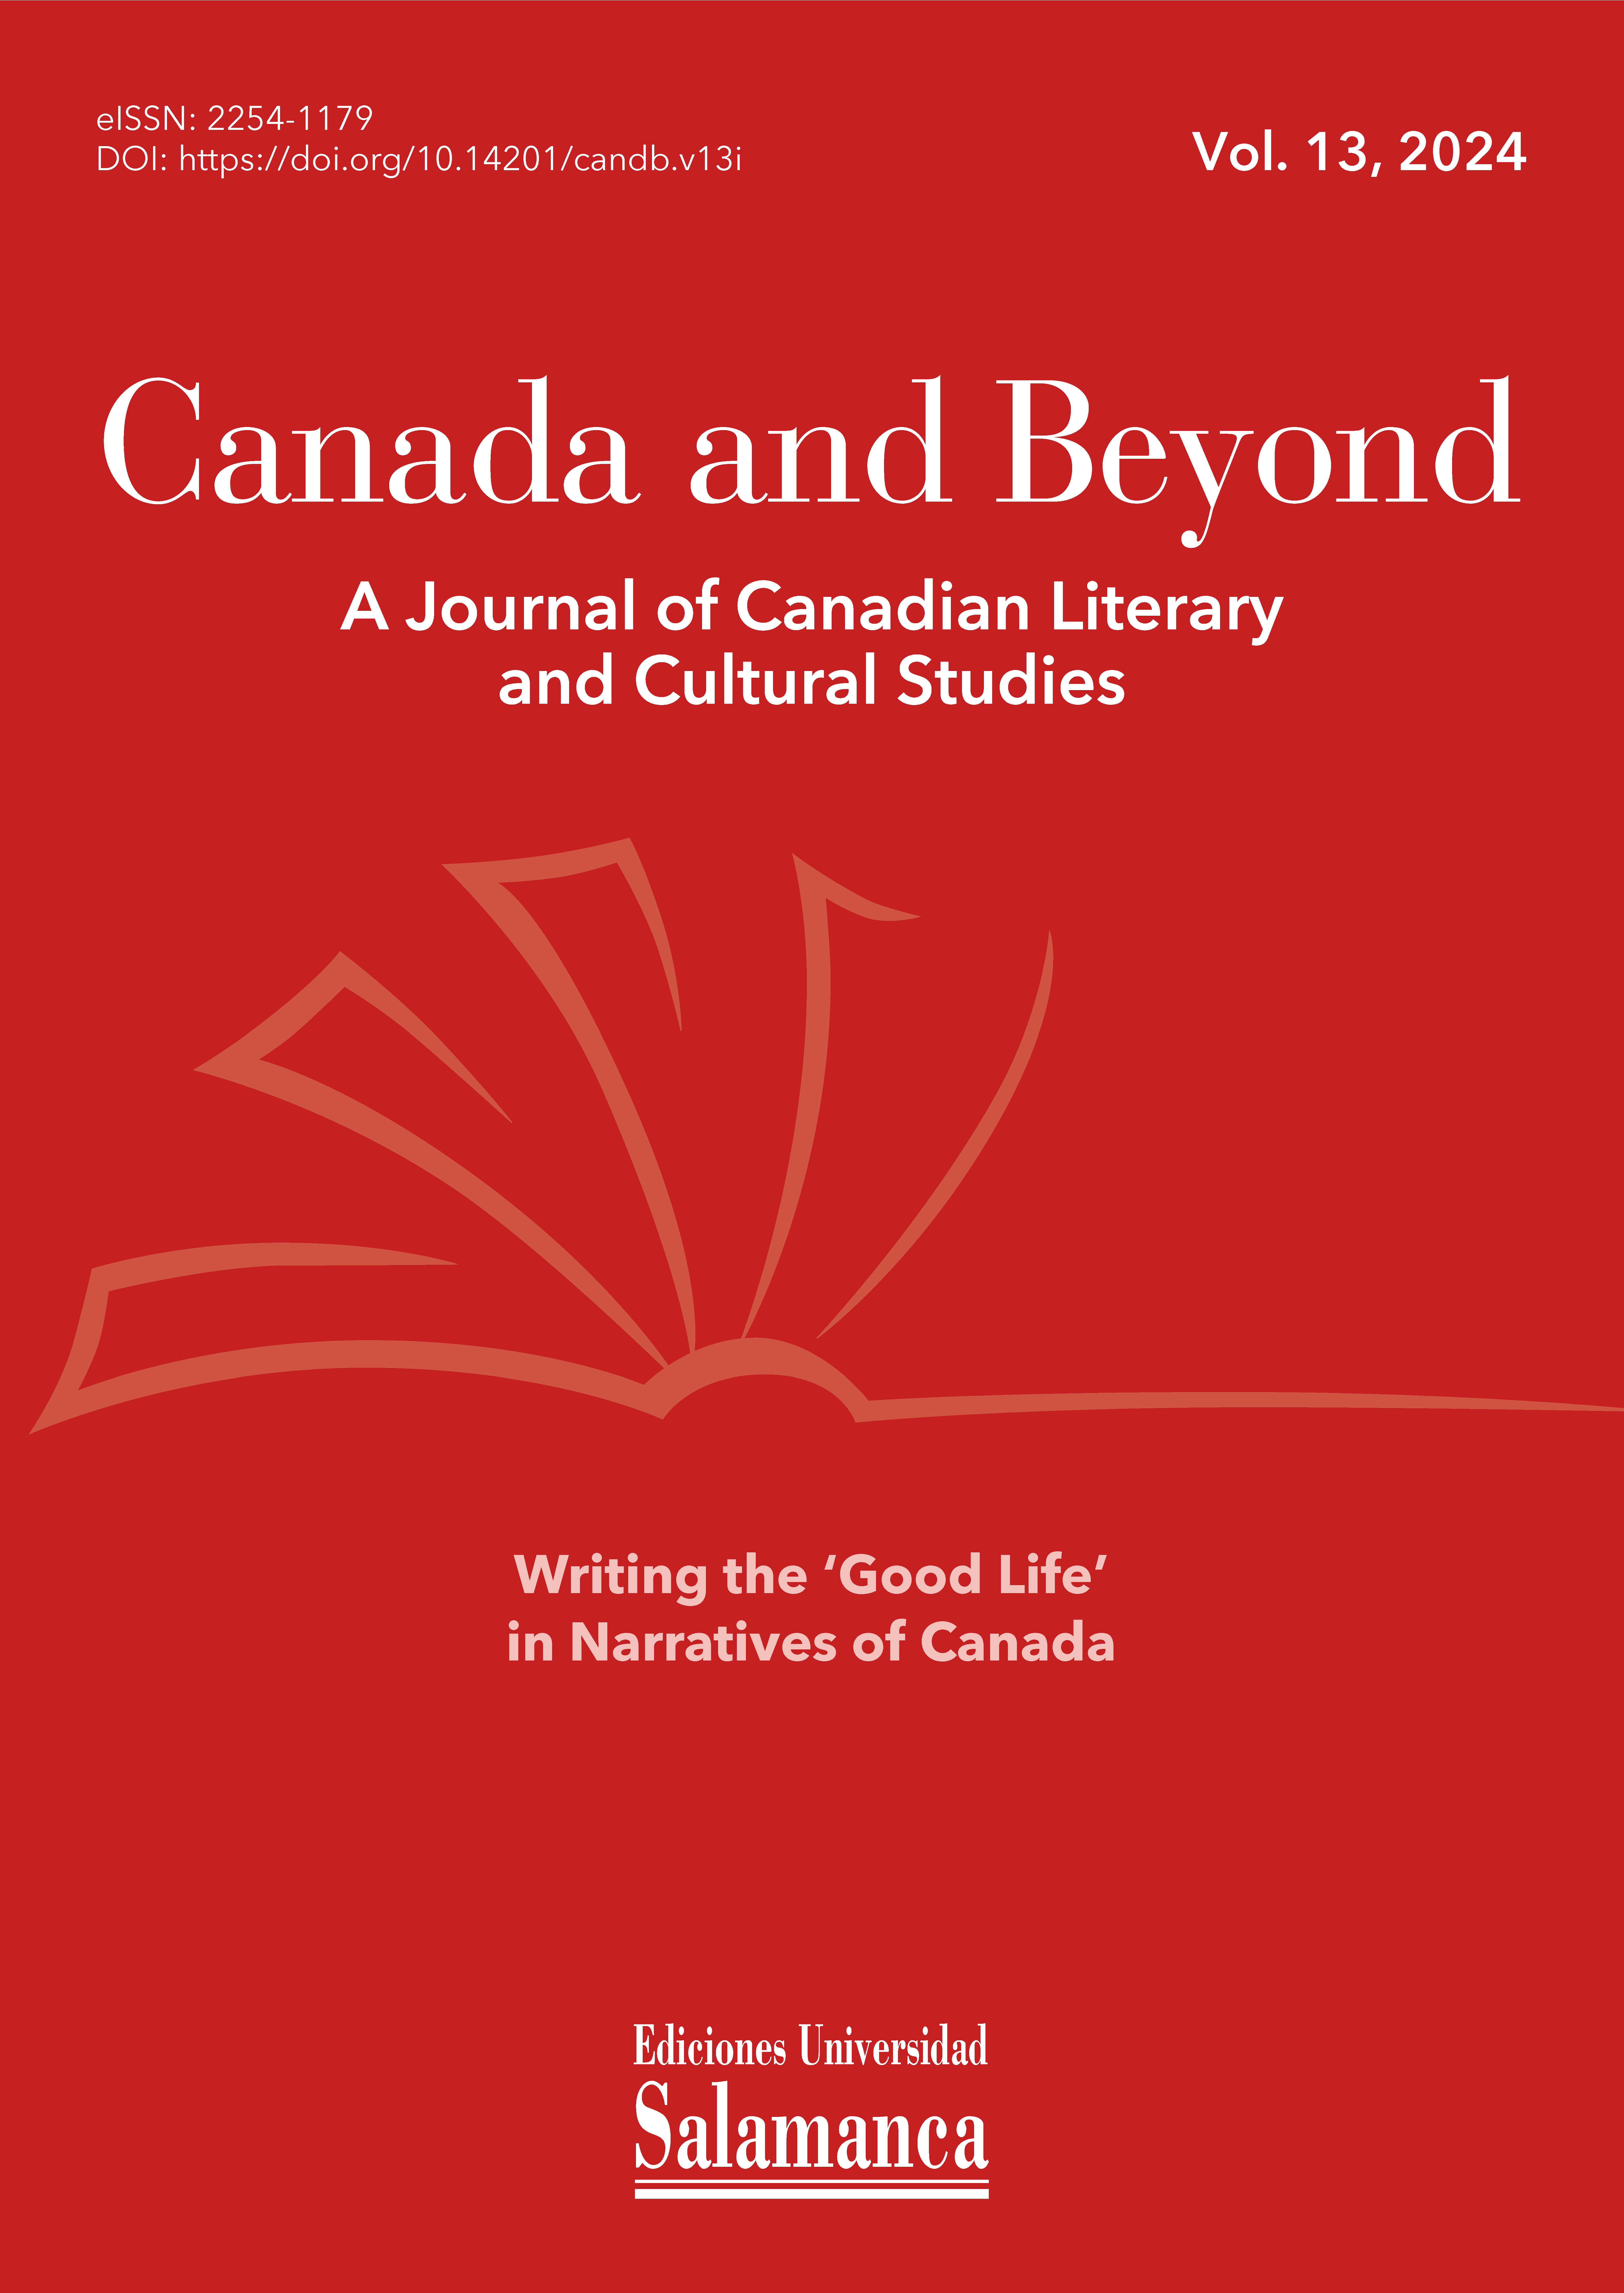                         View Vol. 13 (2024): Writing the ‘Good Life’ in Narratives of Canada
                    